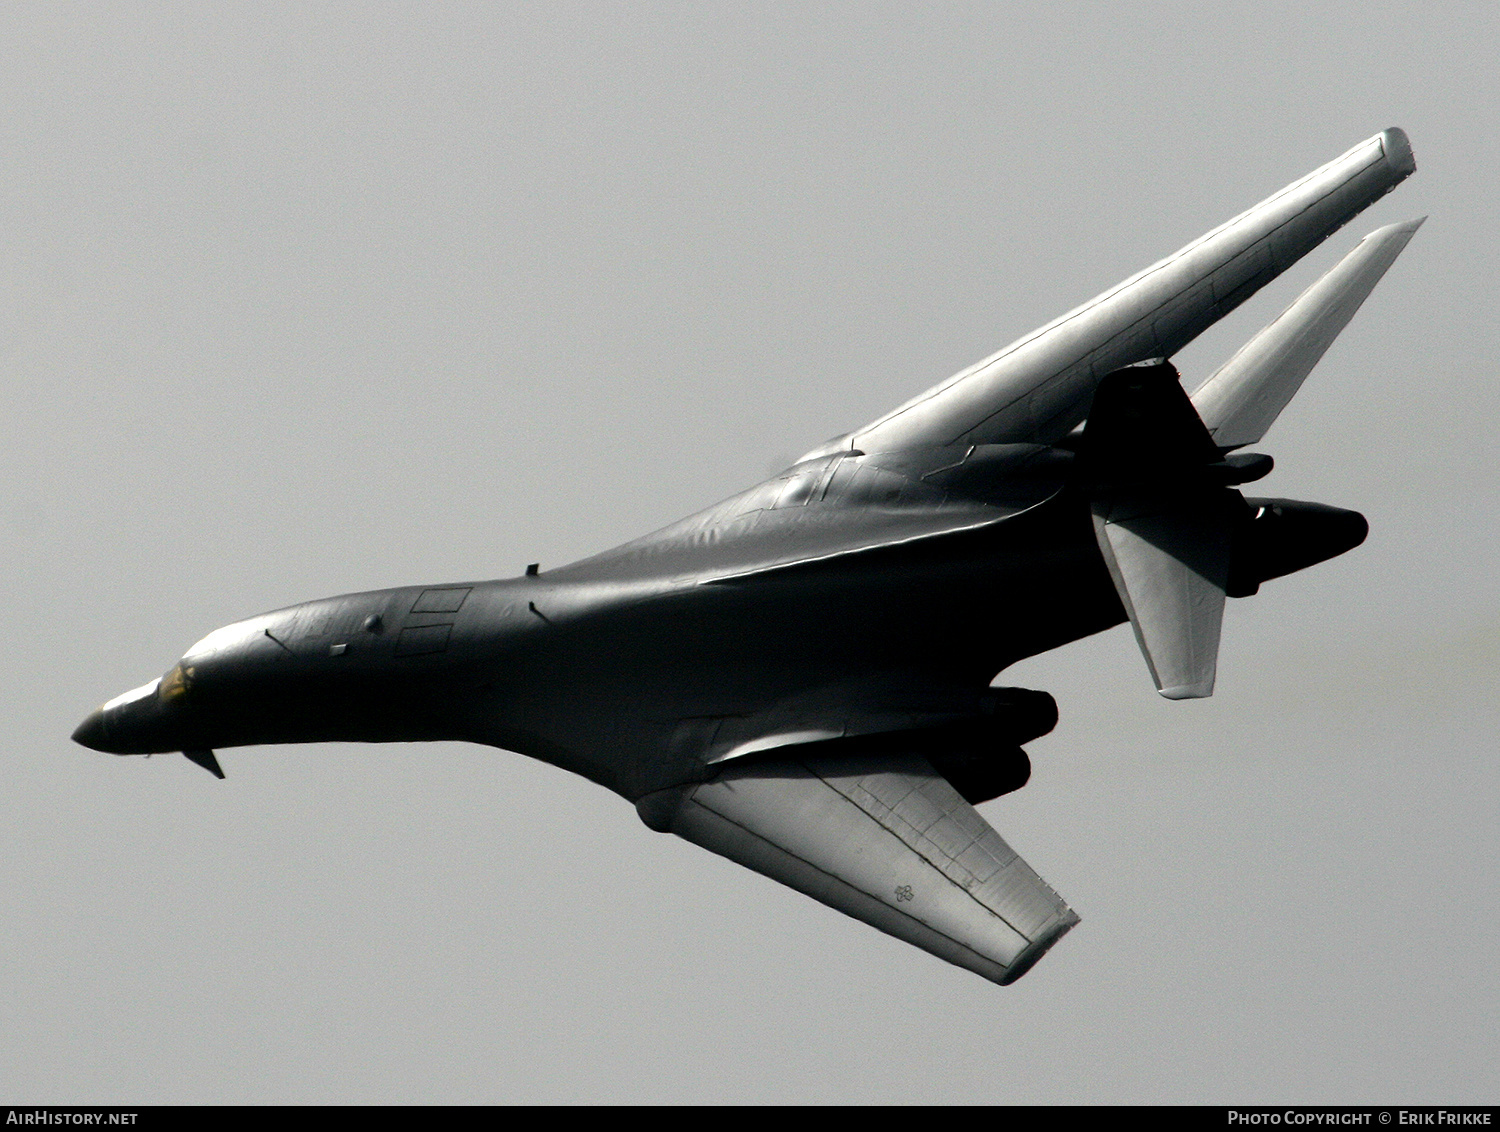 Rockwell B-1 Lancer Wallpapers